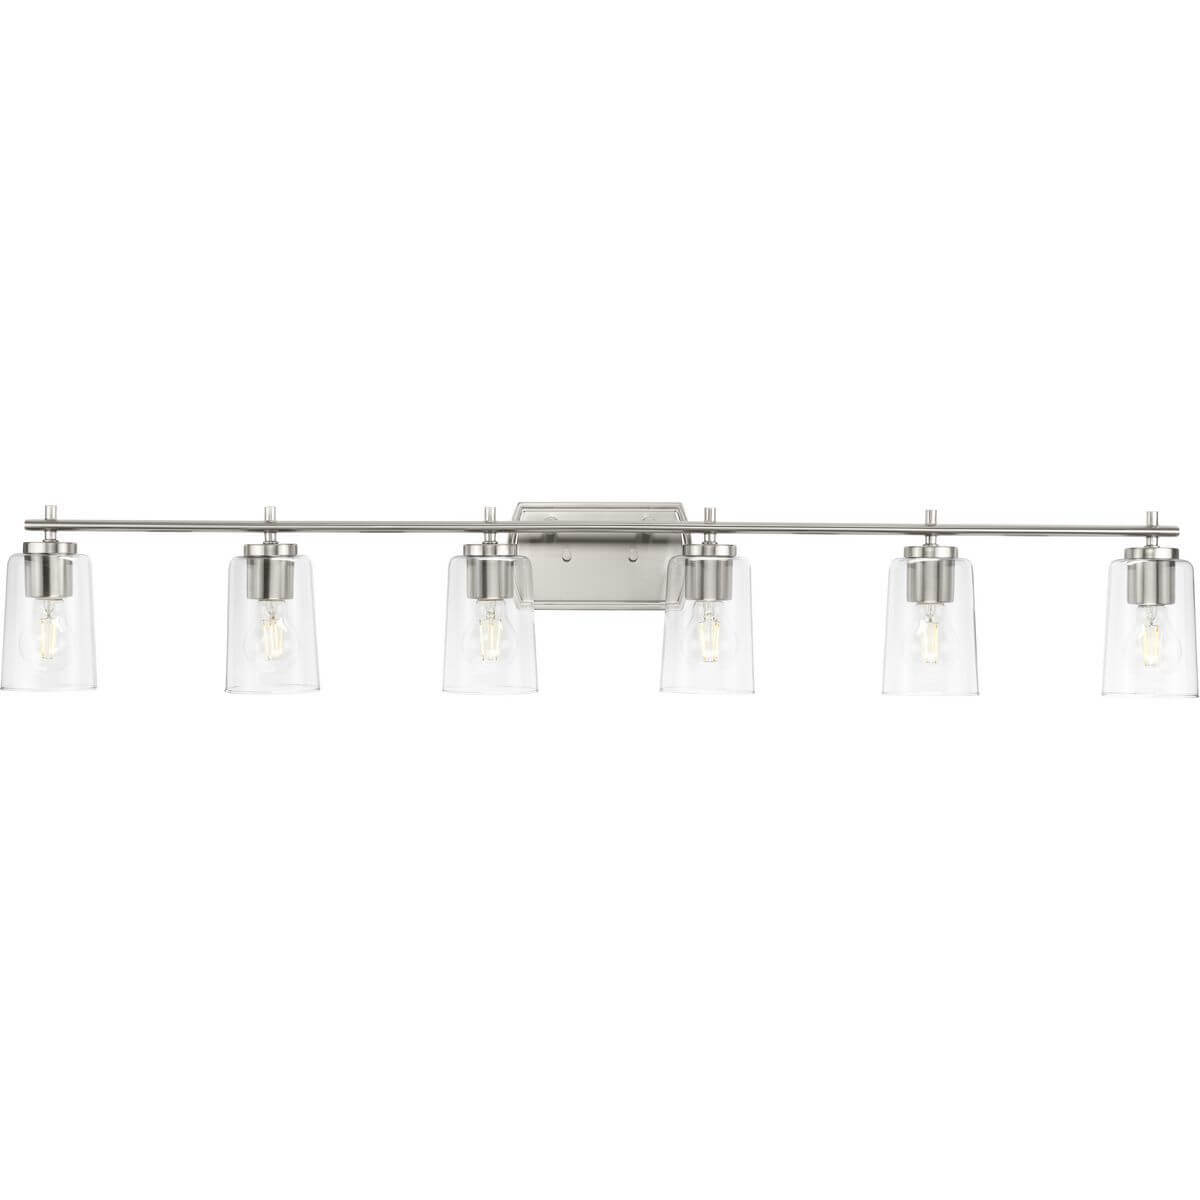 Progress Lighting Adley 6 Light 49 inch Bath Vanity Light in Brushed Nickel with Clear Glass P300372-009